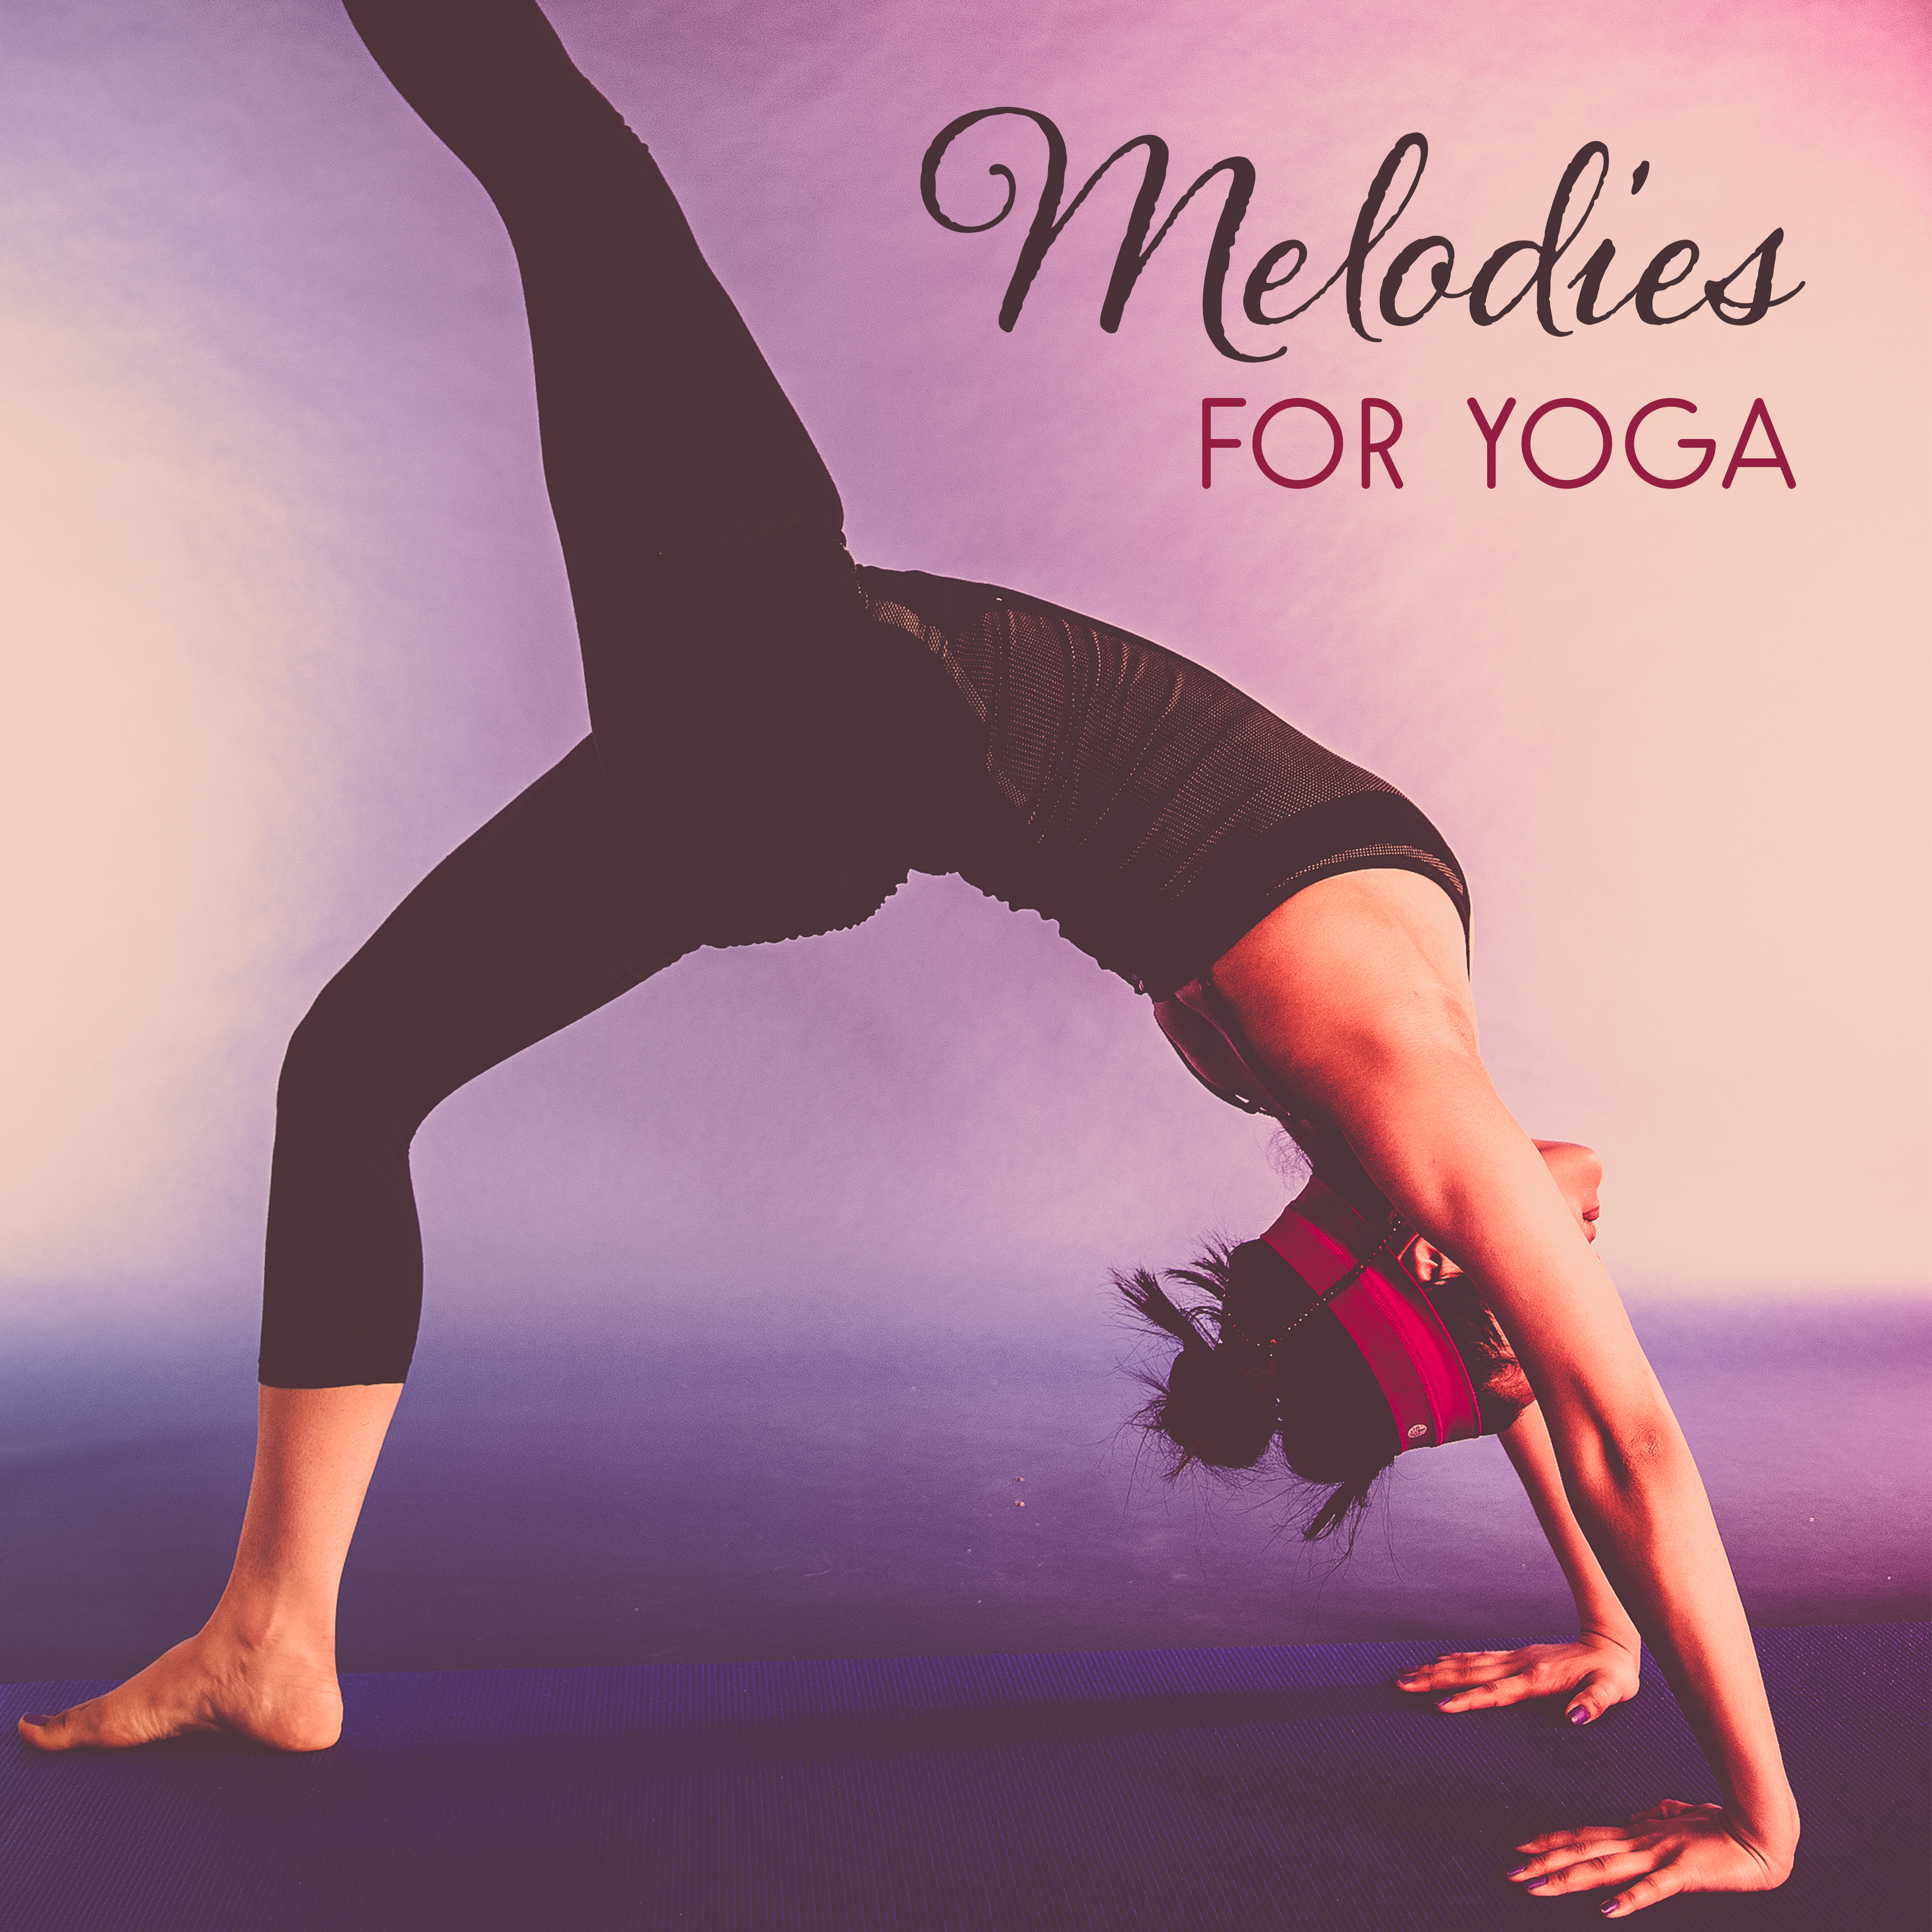 Melodies for Yoga  Morning Meditation, Relaxed Mind, Relax, Hatha Yoga, Inner Healing